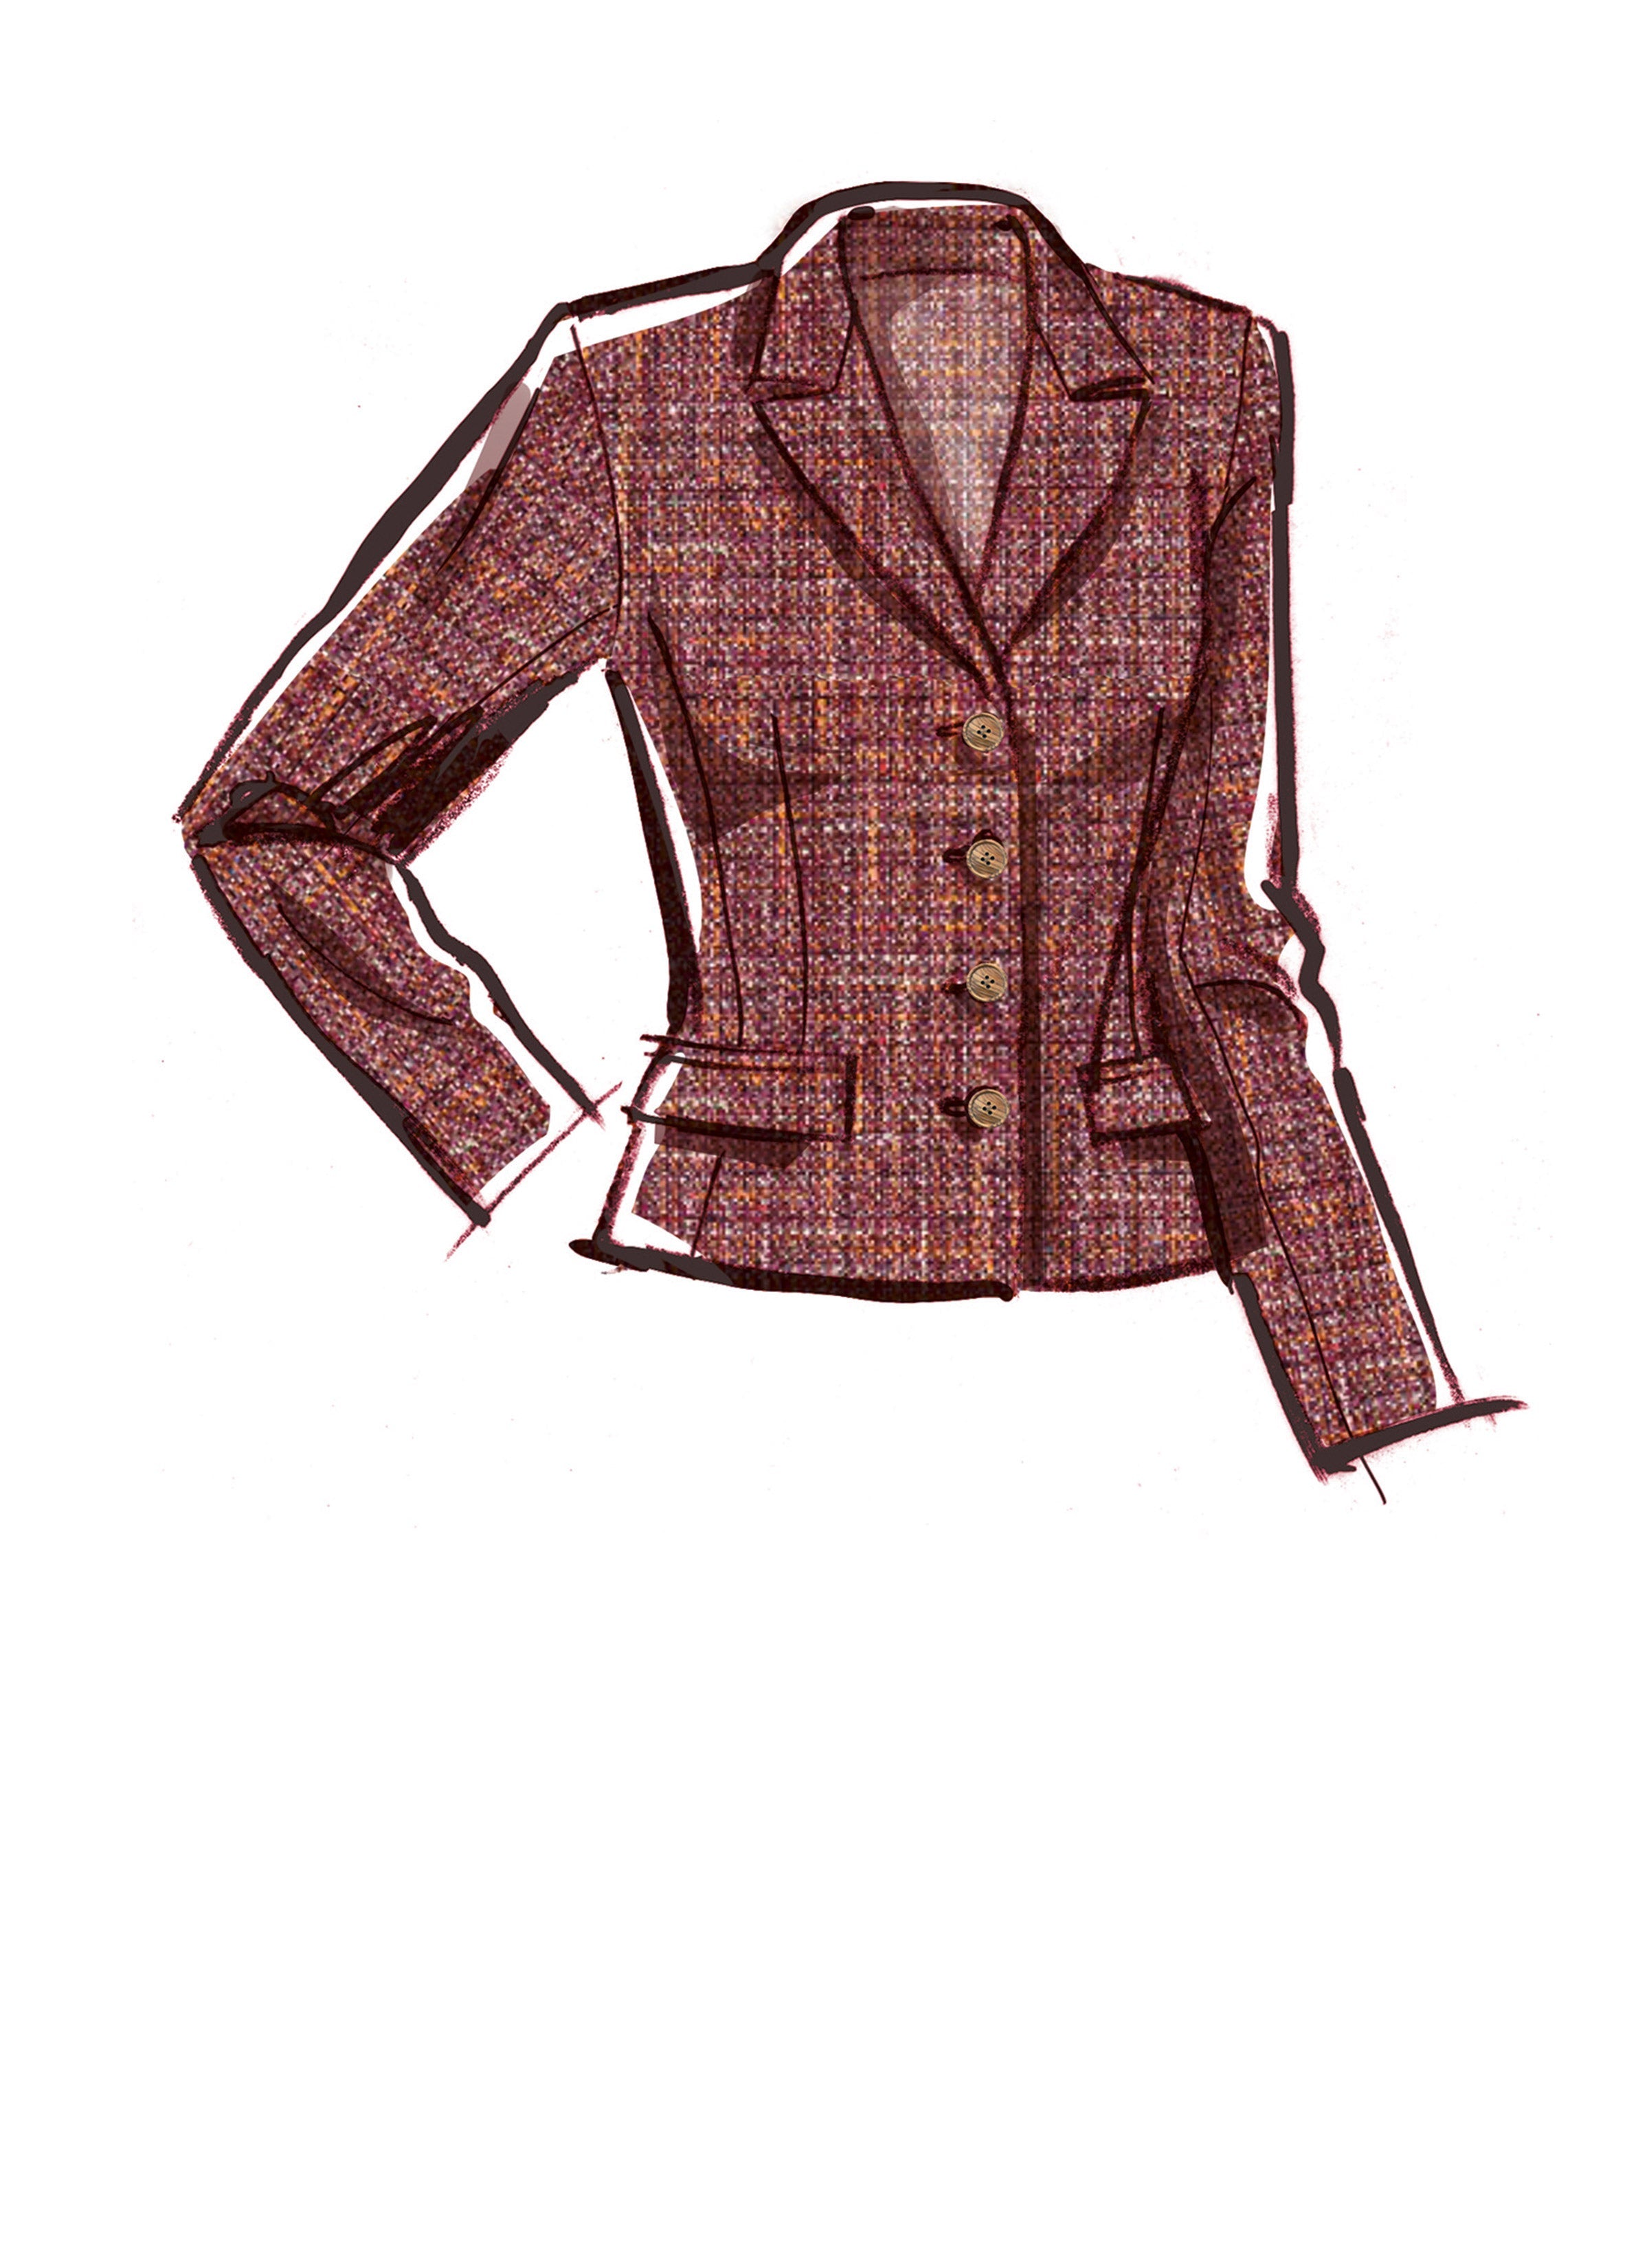 McCall's Sewing Pattern M8350 Blazer and Waistcoat by Melissa Watson from Jaycotts Sewing Supplies